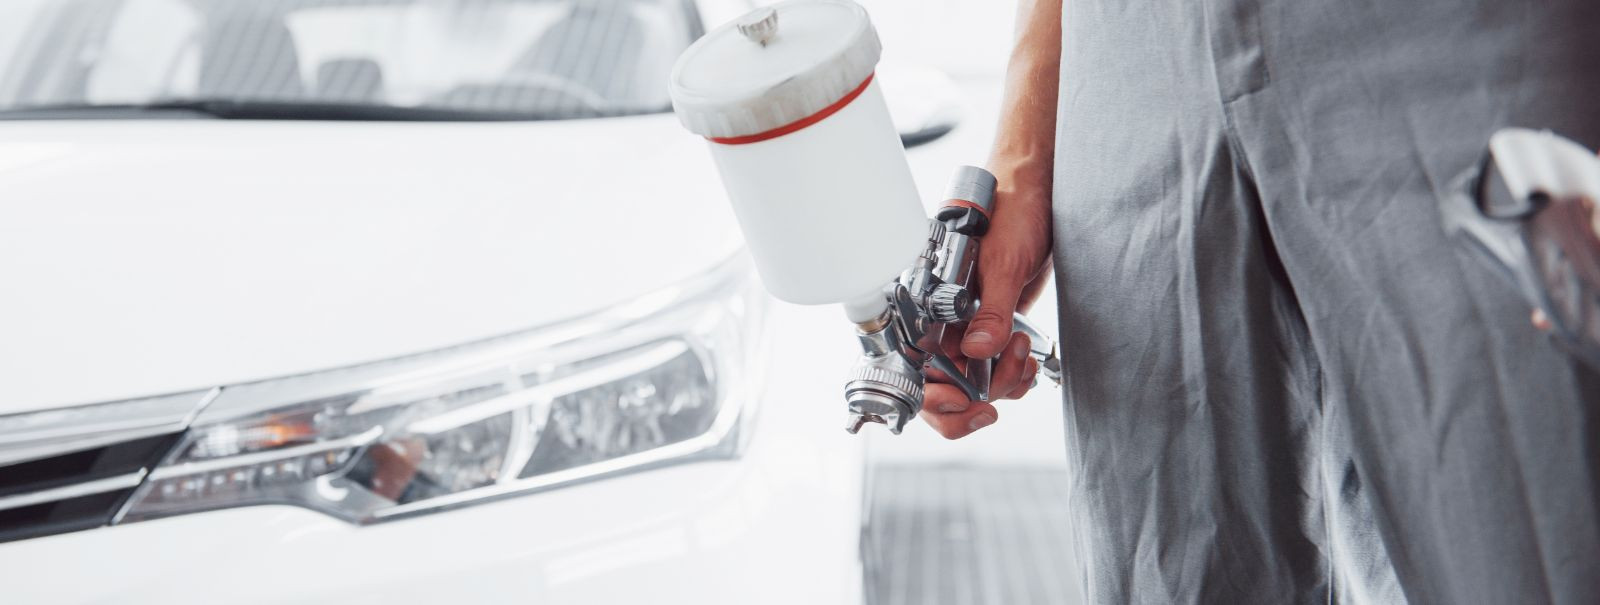 When it comes to car maintenance and restoration, the debate between taking the DIY route or calling in the professionals is a common one. With the right approa